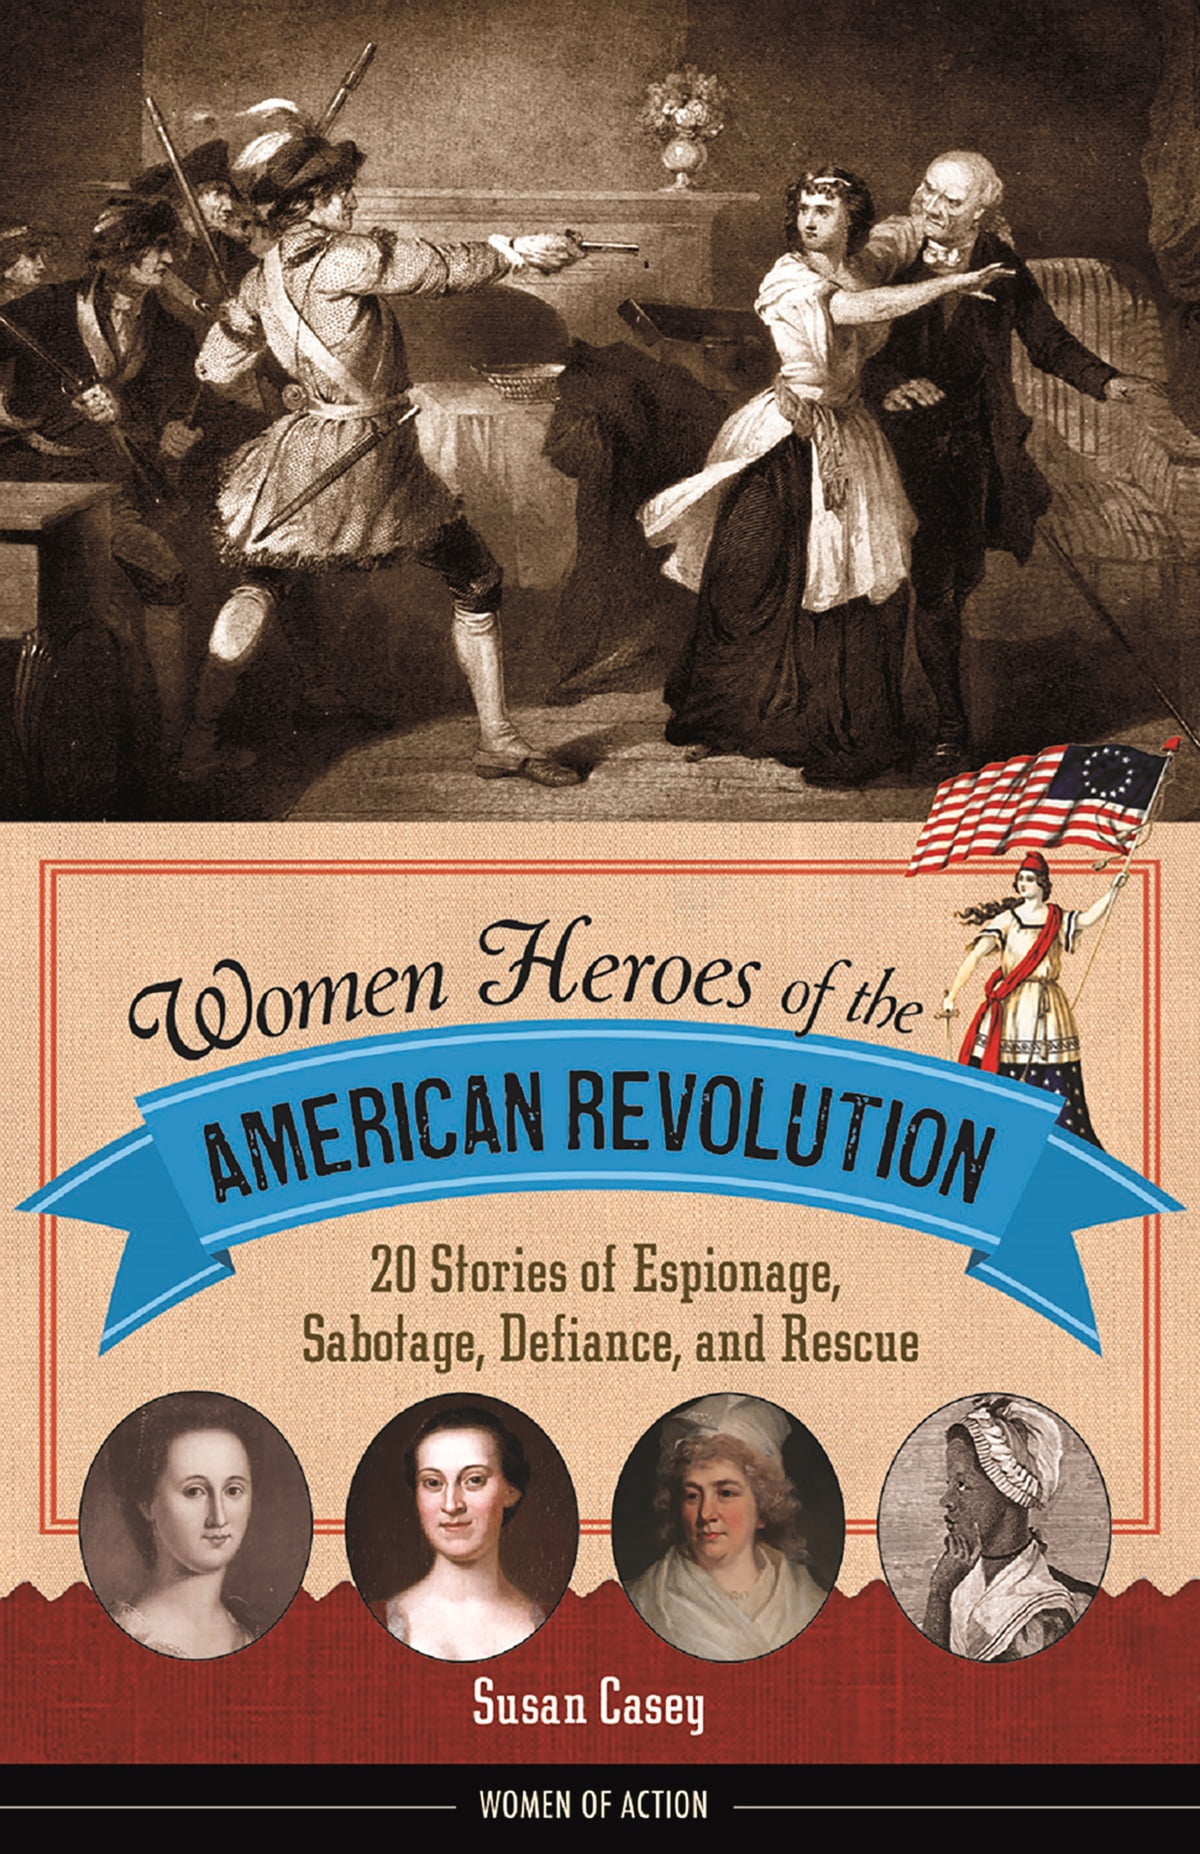 Women Heroes of the American Revolution by Susan Casey